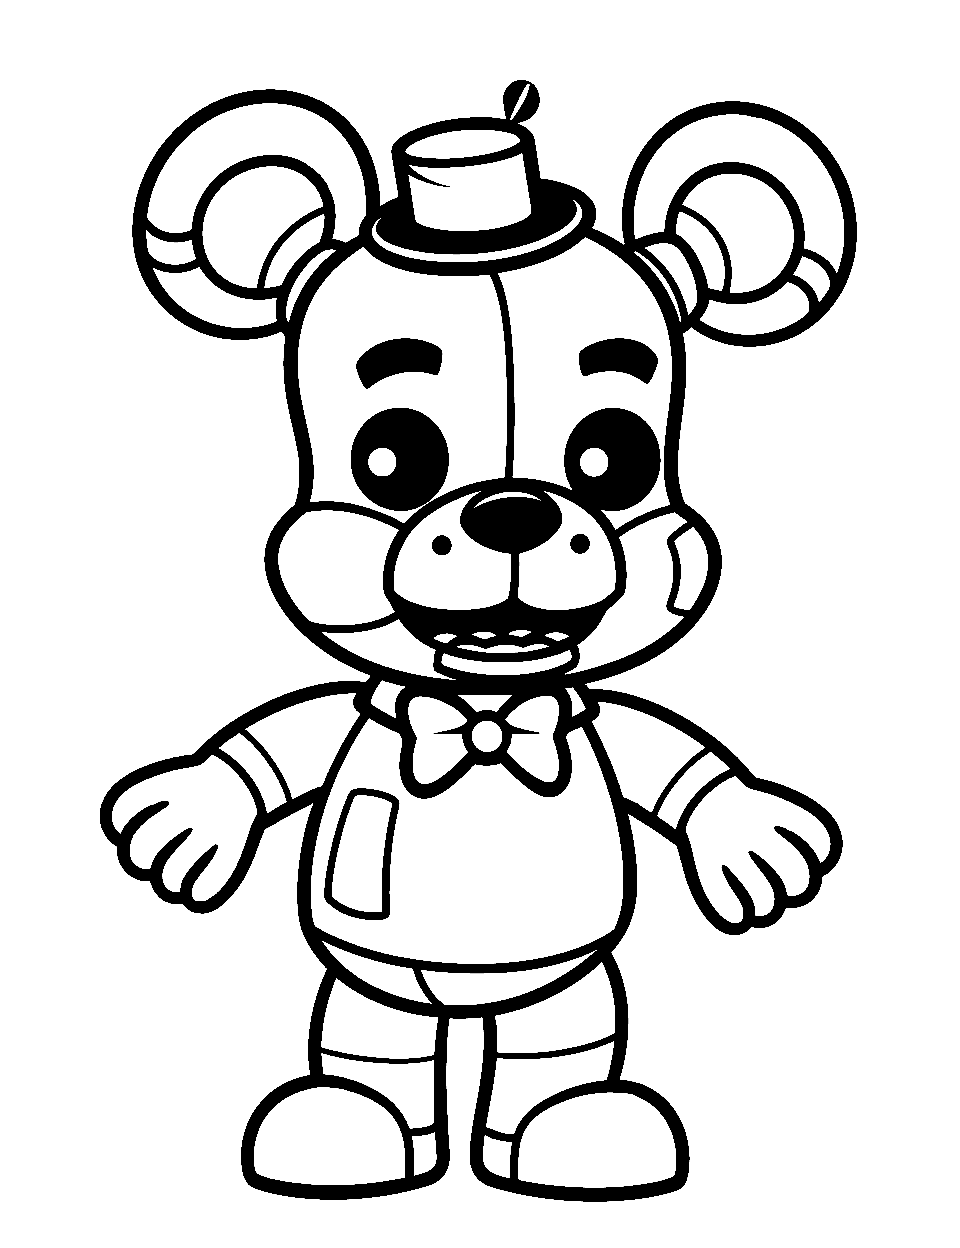 Five Nights At Freddy's (map)  Fnaf coloring pages, Freddy